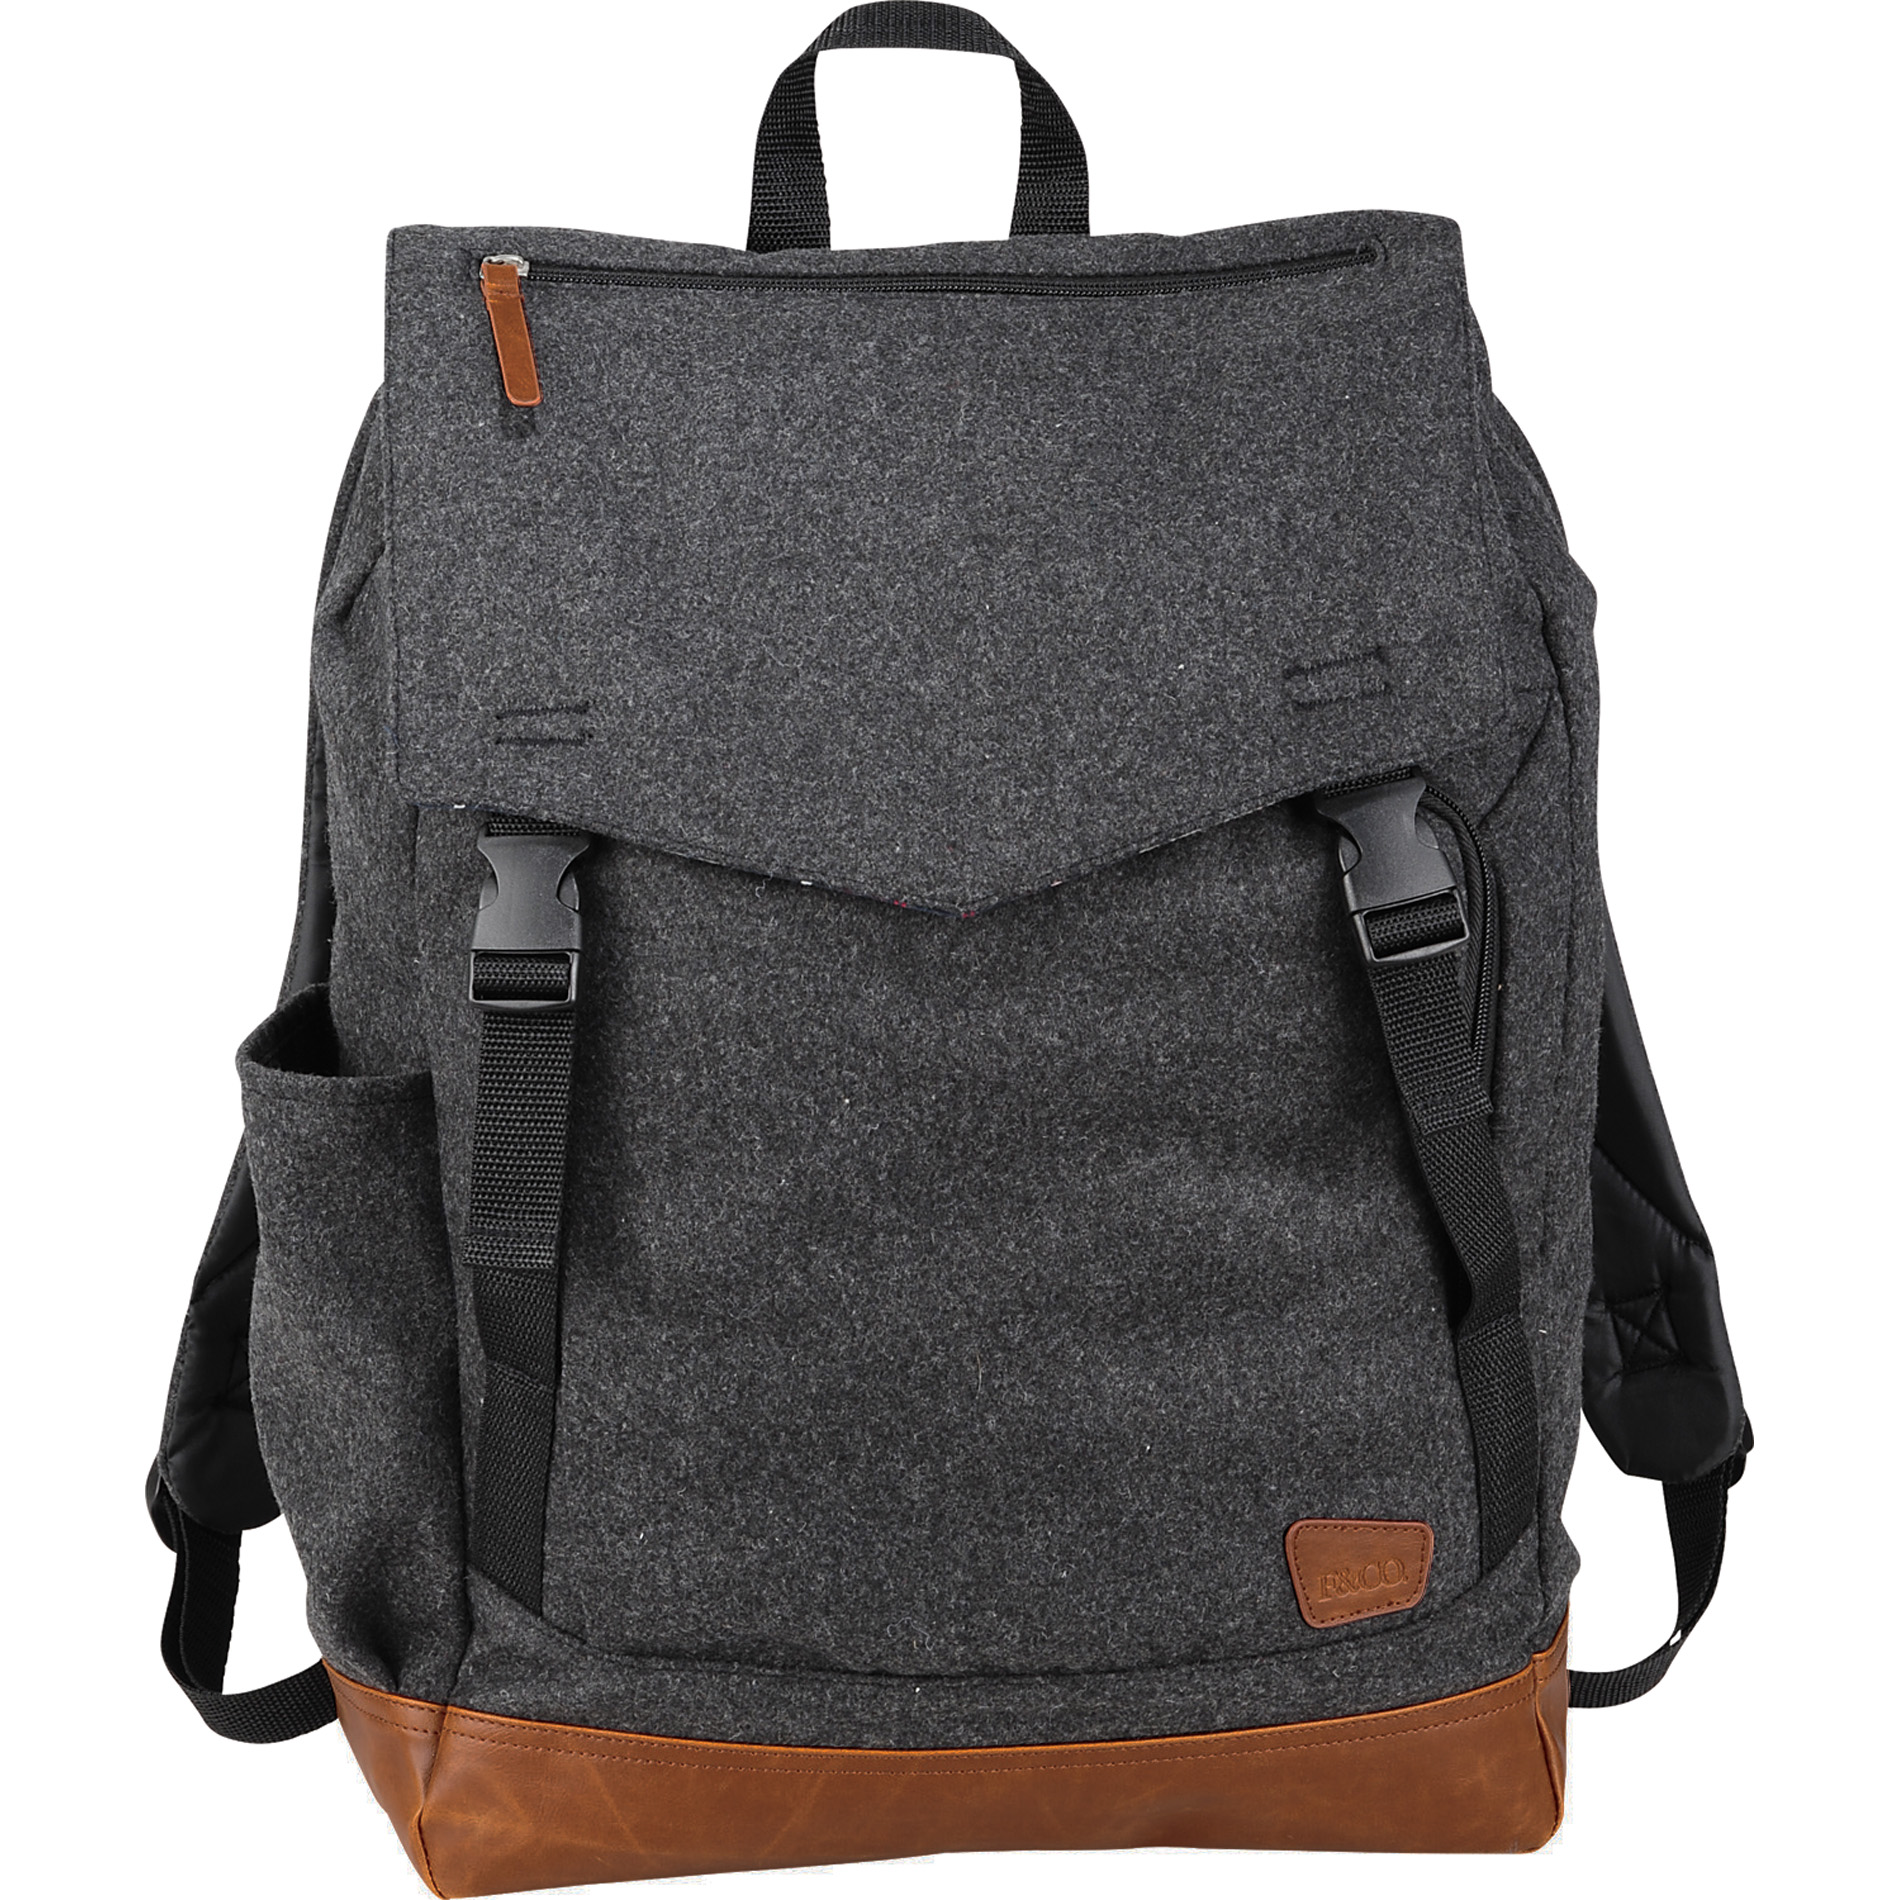 Field & Co. 7950-72 - Campster Wool 15" Rucksack Backpack